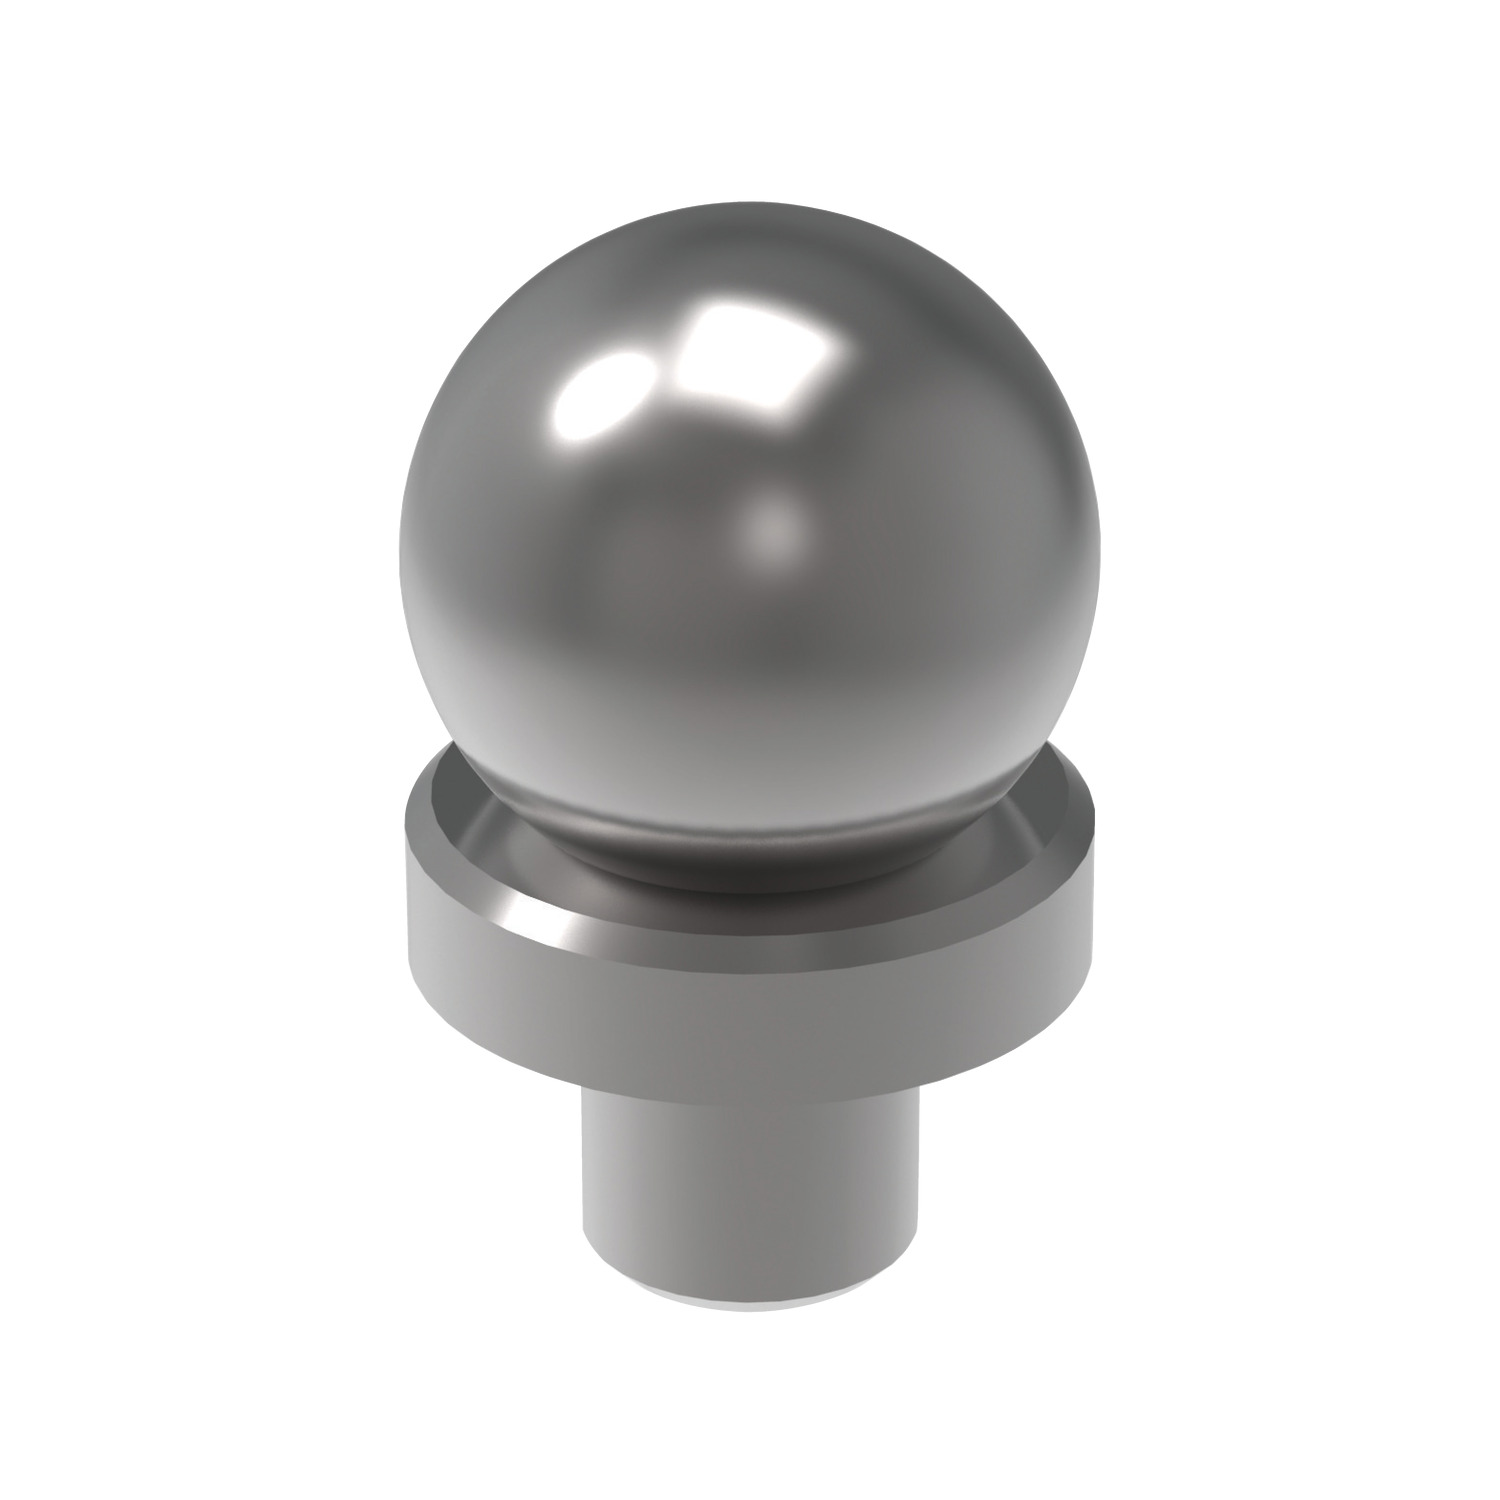 Inspection Balls - Imperial Case hardened. short shank inspection balls with a one piece construction.